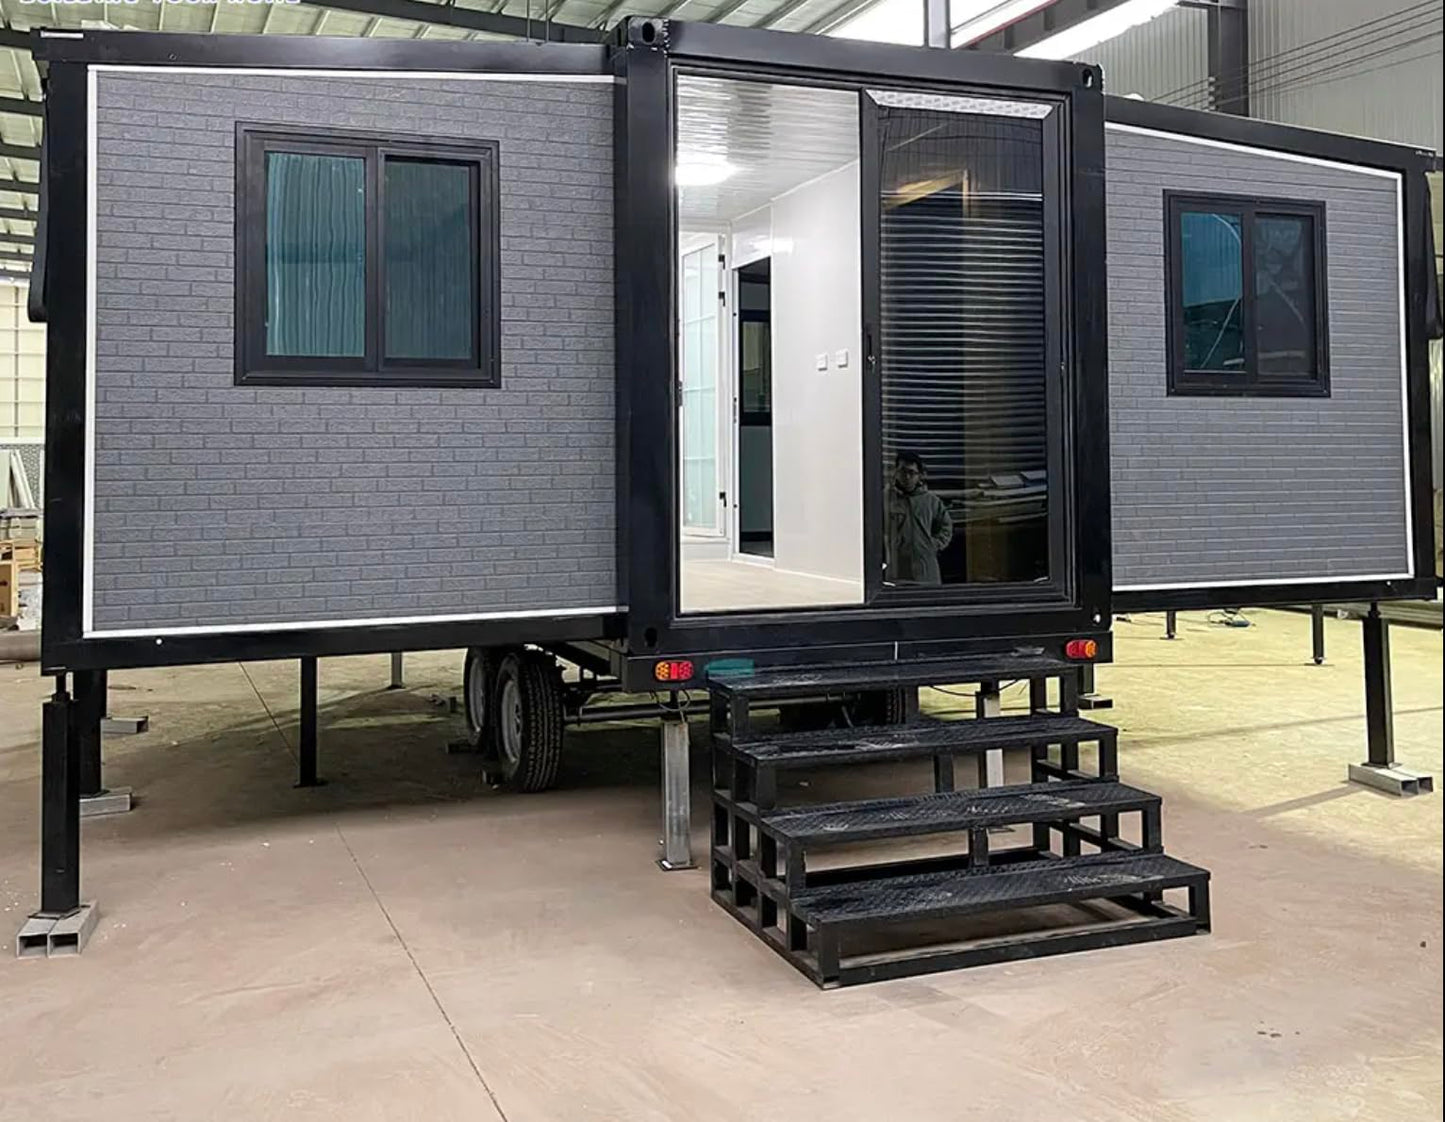 19x20ft Portable Prefabricated Portable House, Light Steel Tiny House Kit, Fully Equipped, Mobile Home for Vacation, Temporary Home, Office, Hotel, Villa (19x20ft - 2 Bedroom, 1 Bath)